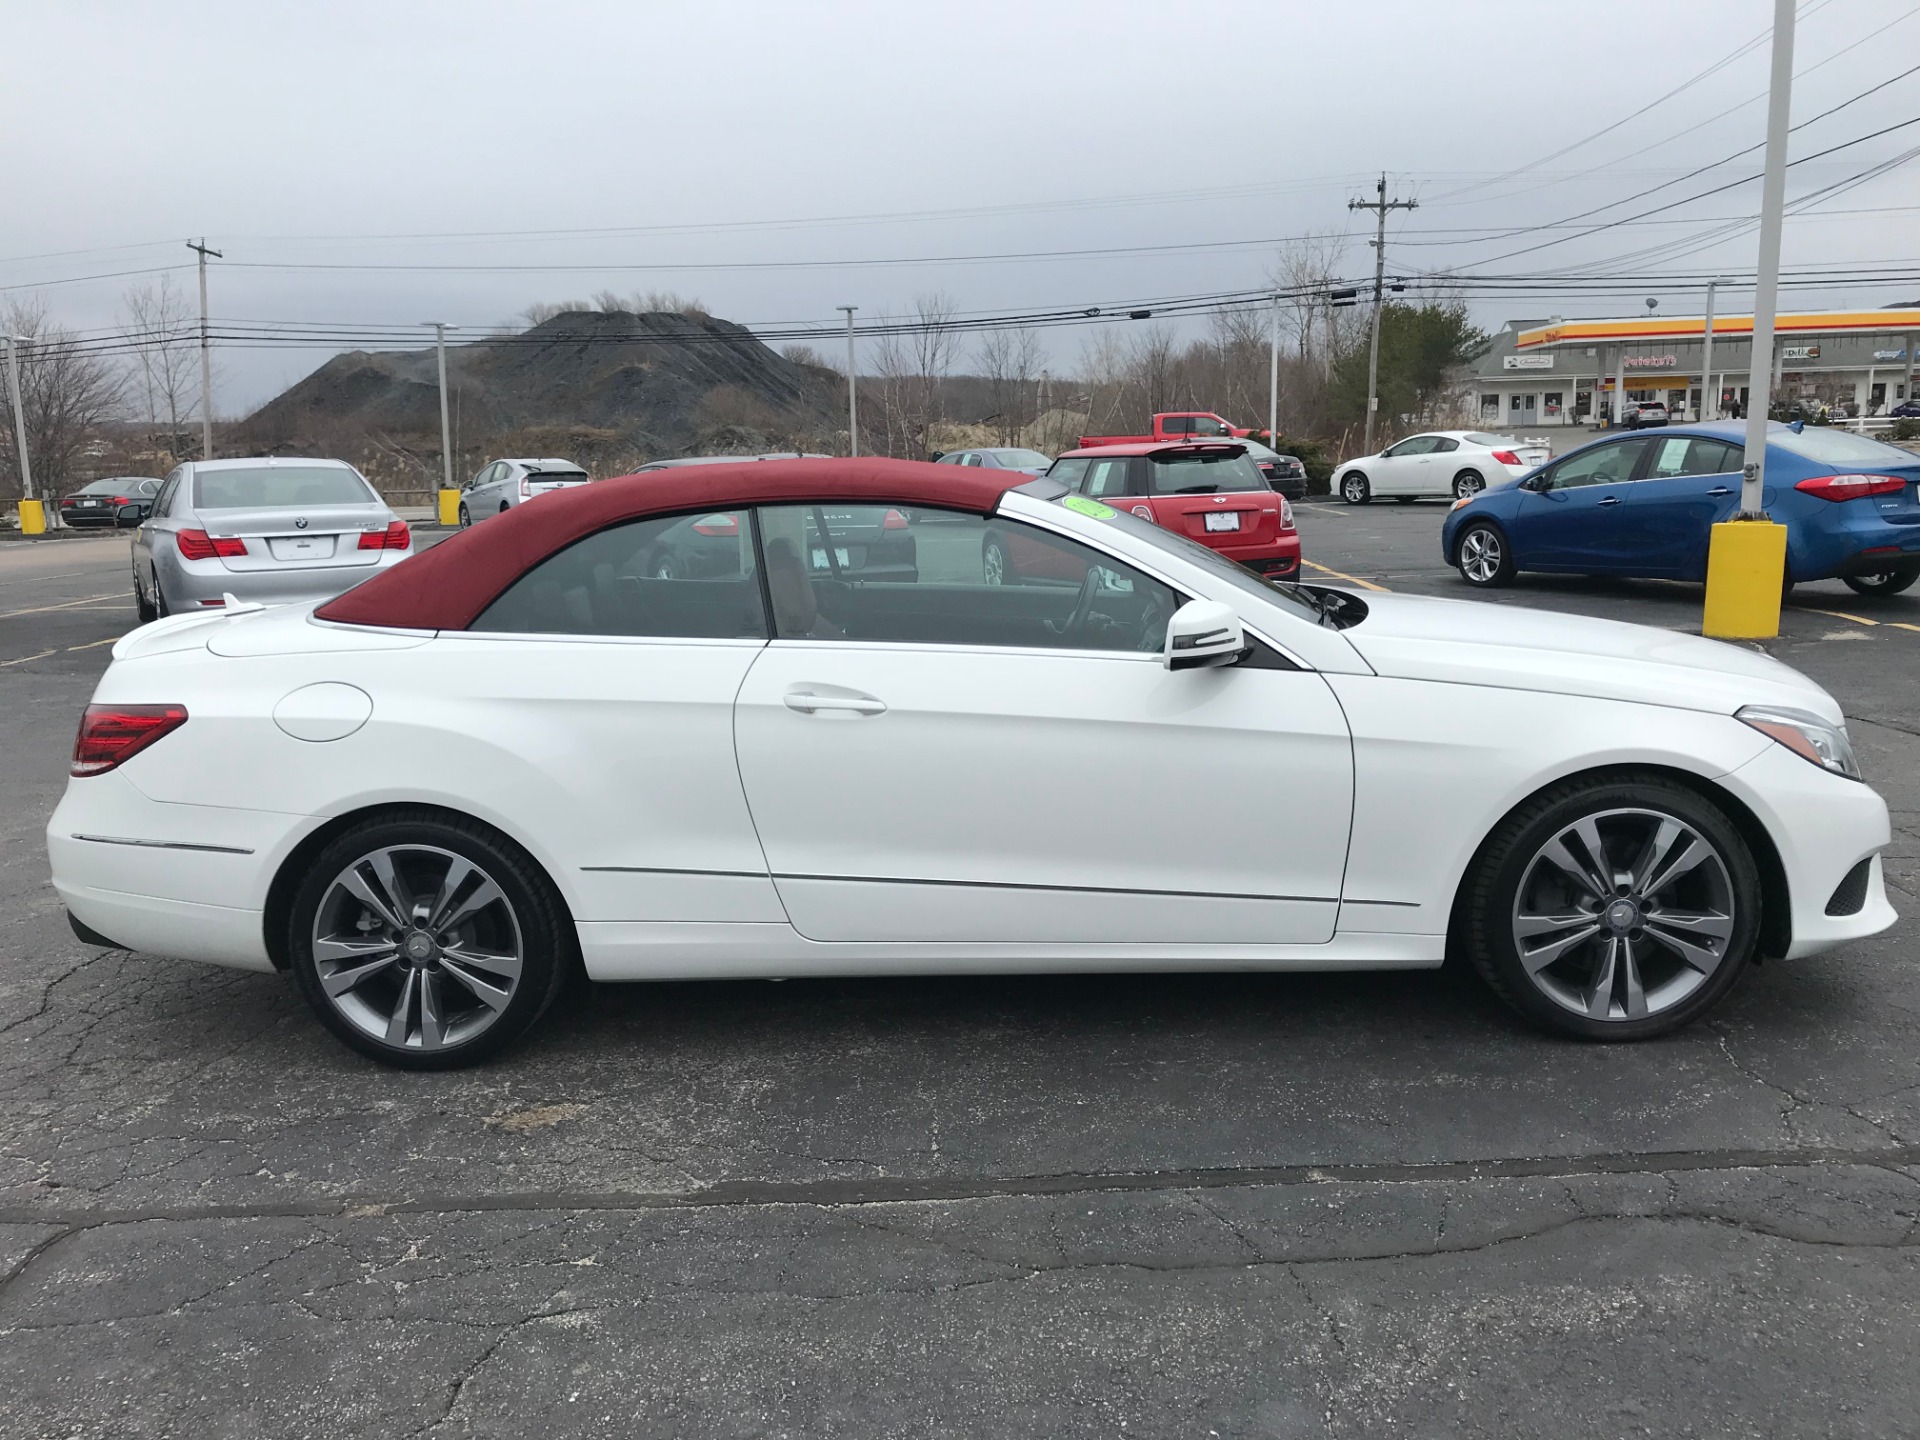 Used 14 Mercedes Benz E Class 50 For Sale 27 900 Executive Auto Sales Stock 1617